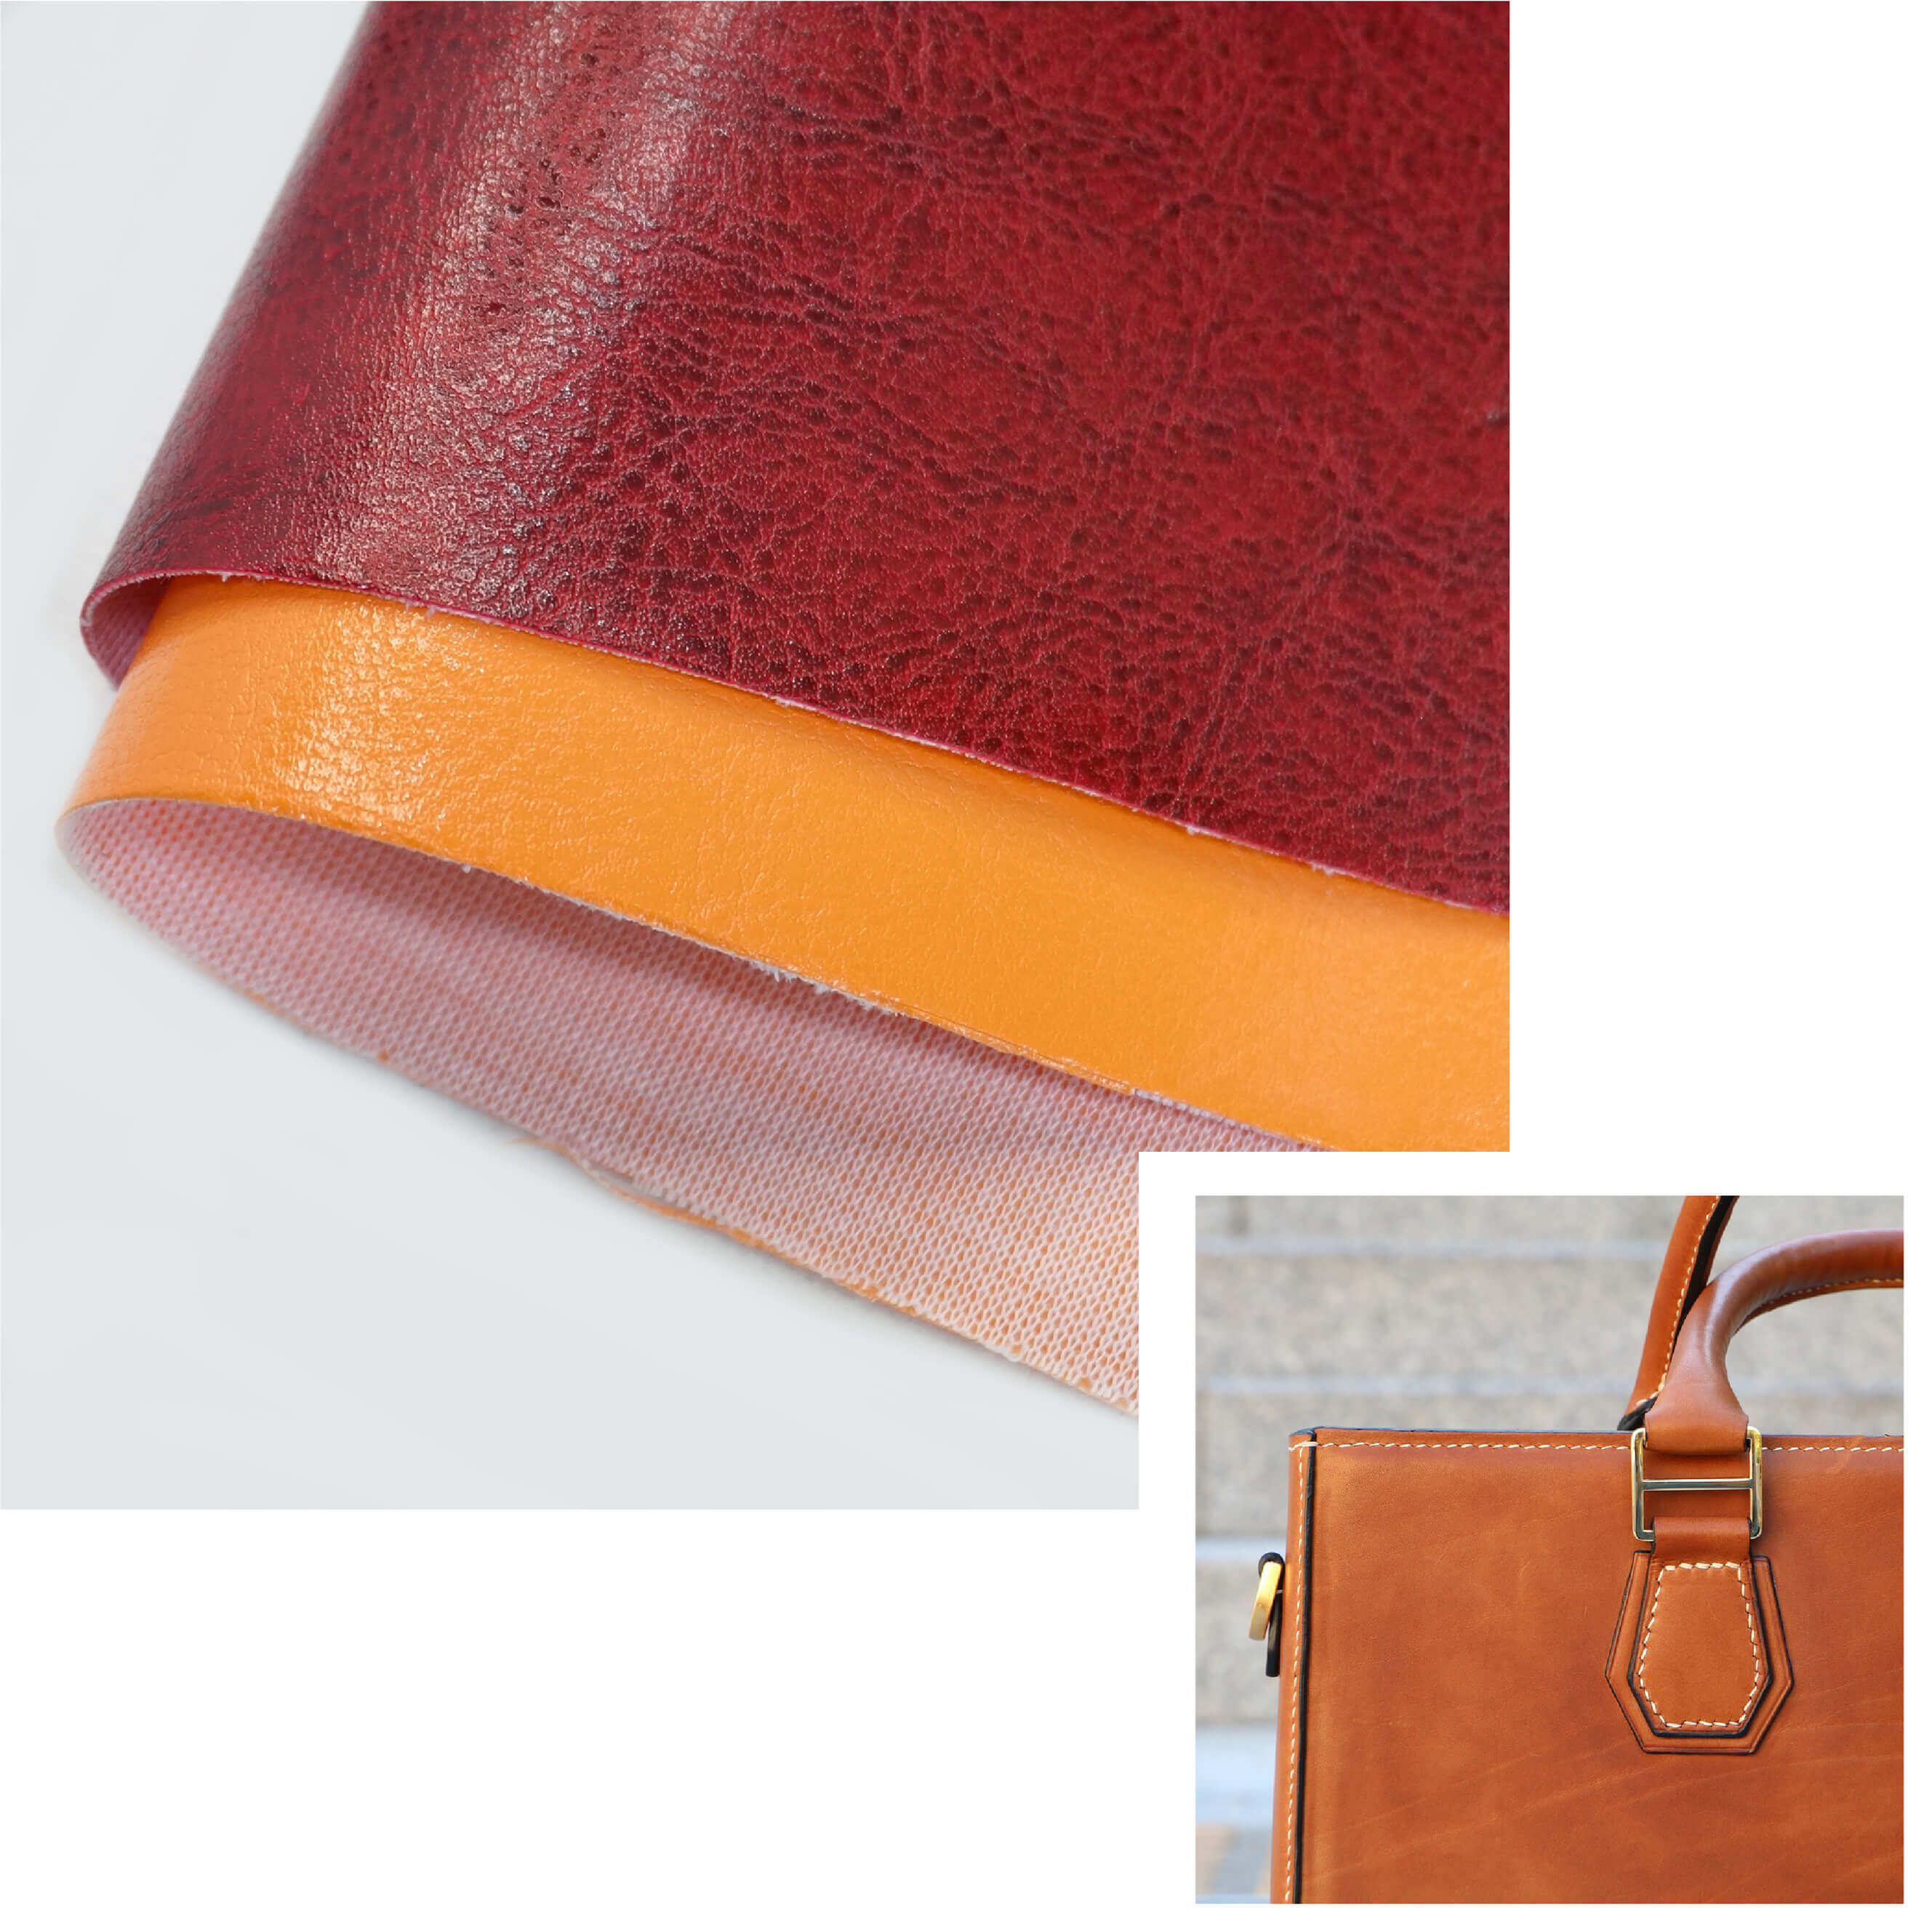 How to Clean PVC Leather Bag: A Step-by-Step Guide